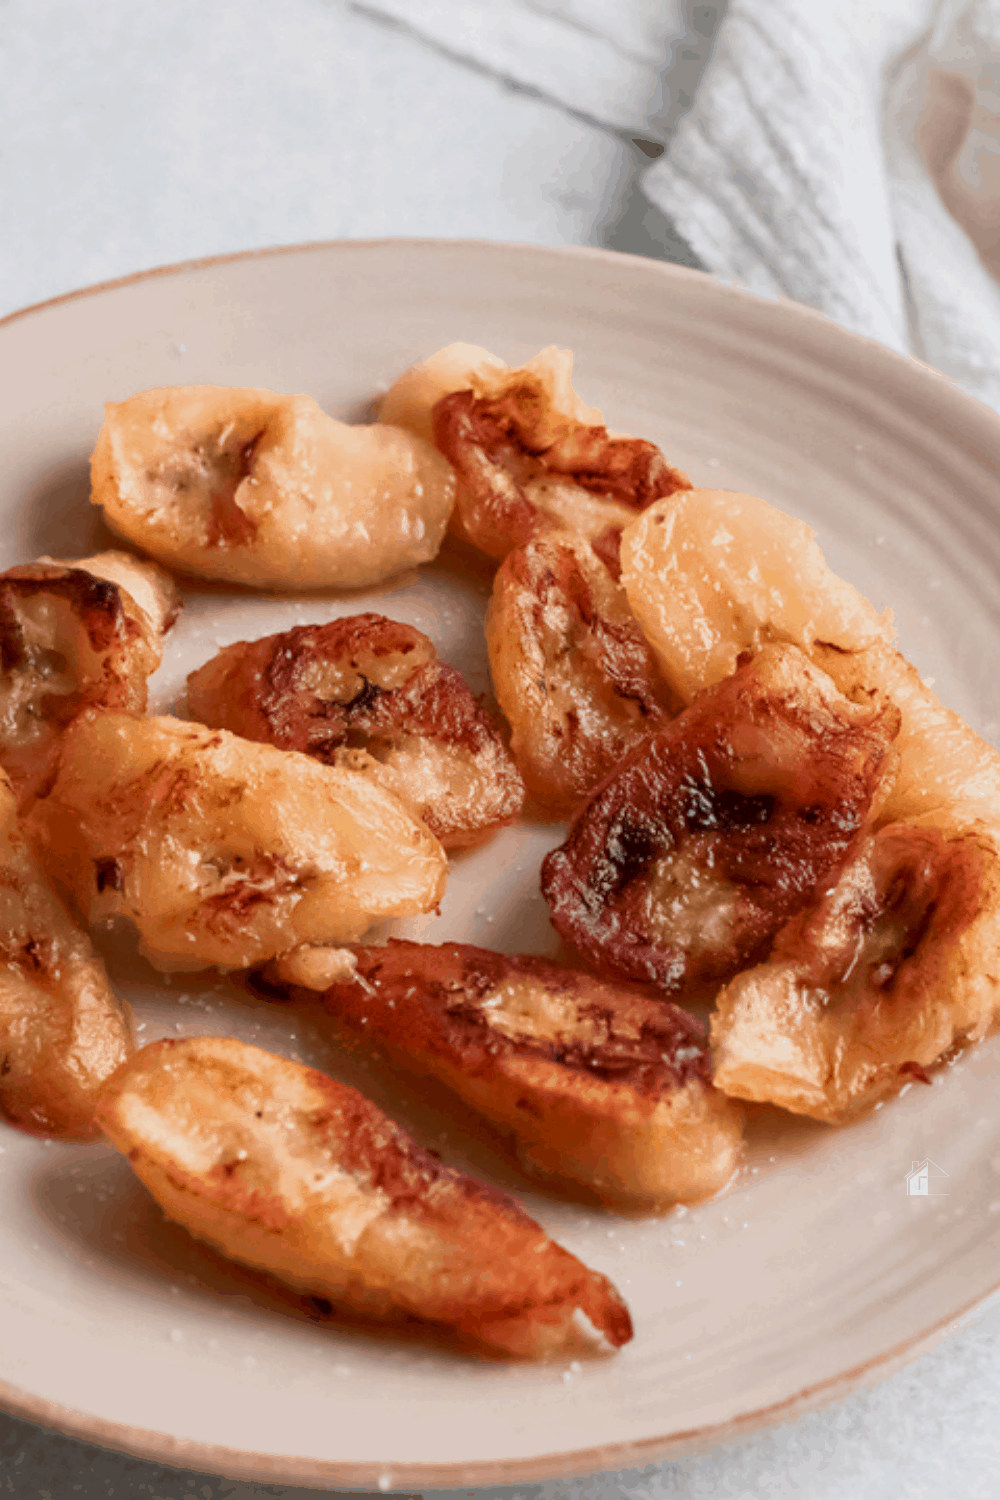 Call it amarillos or fried sweet plantain, it’s a favorite for being one of the best side dishes or have it as it is as a snack or dessert. via @mystayathome